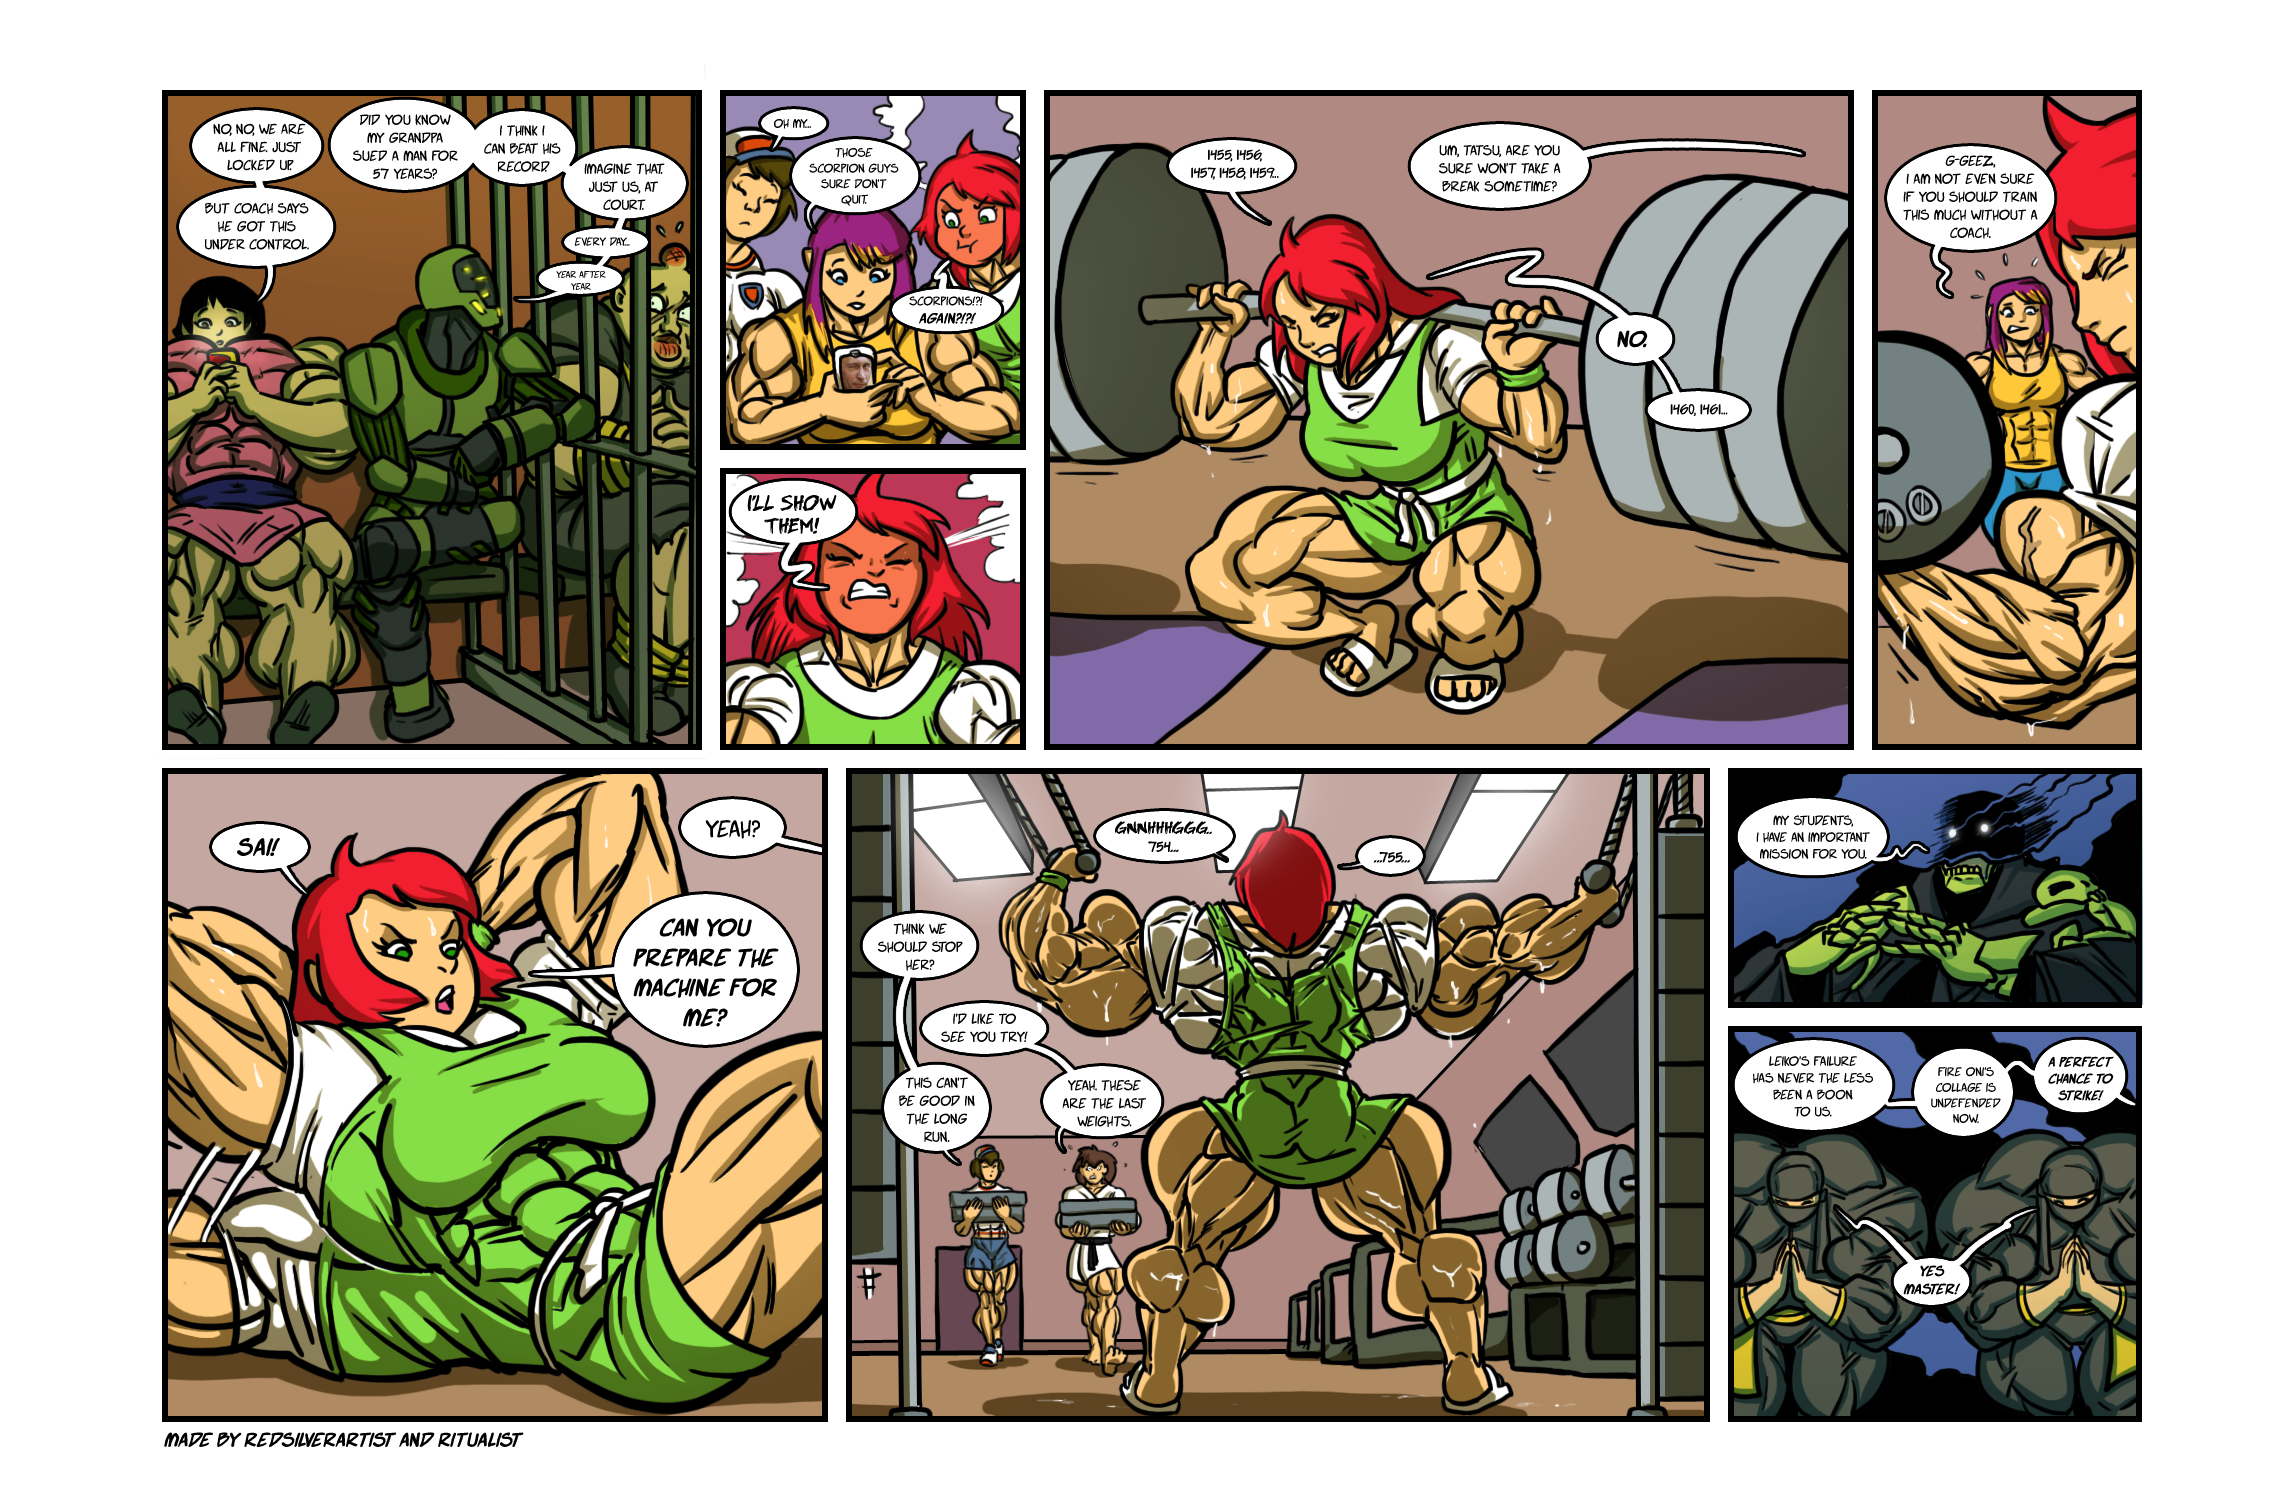 Growth Drive Comic 3 Page 6 By Ritualist On DeviantArt.